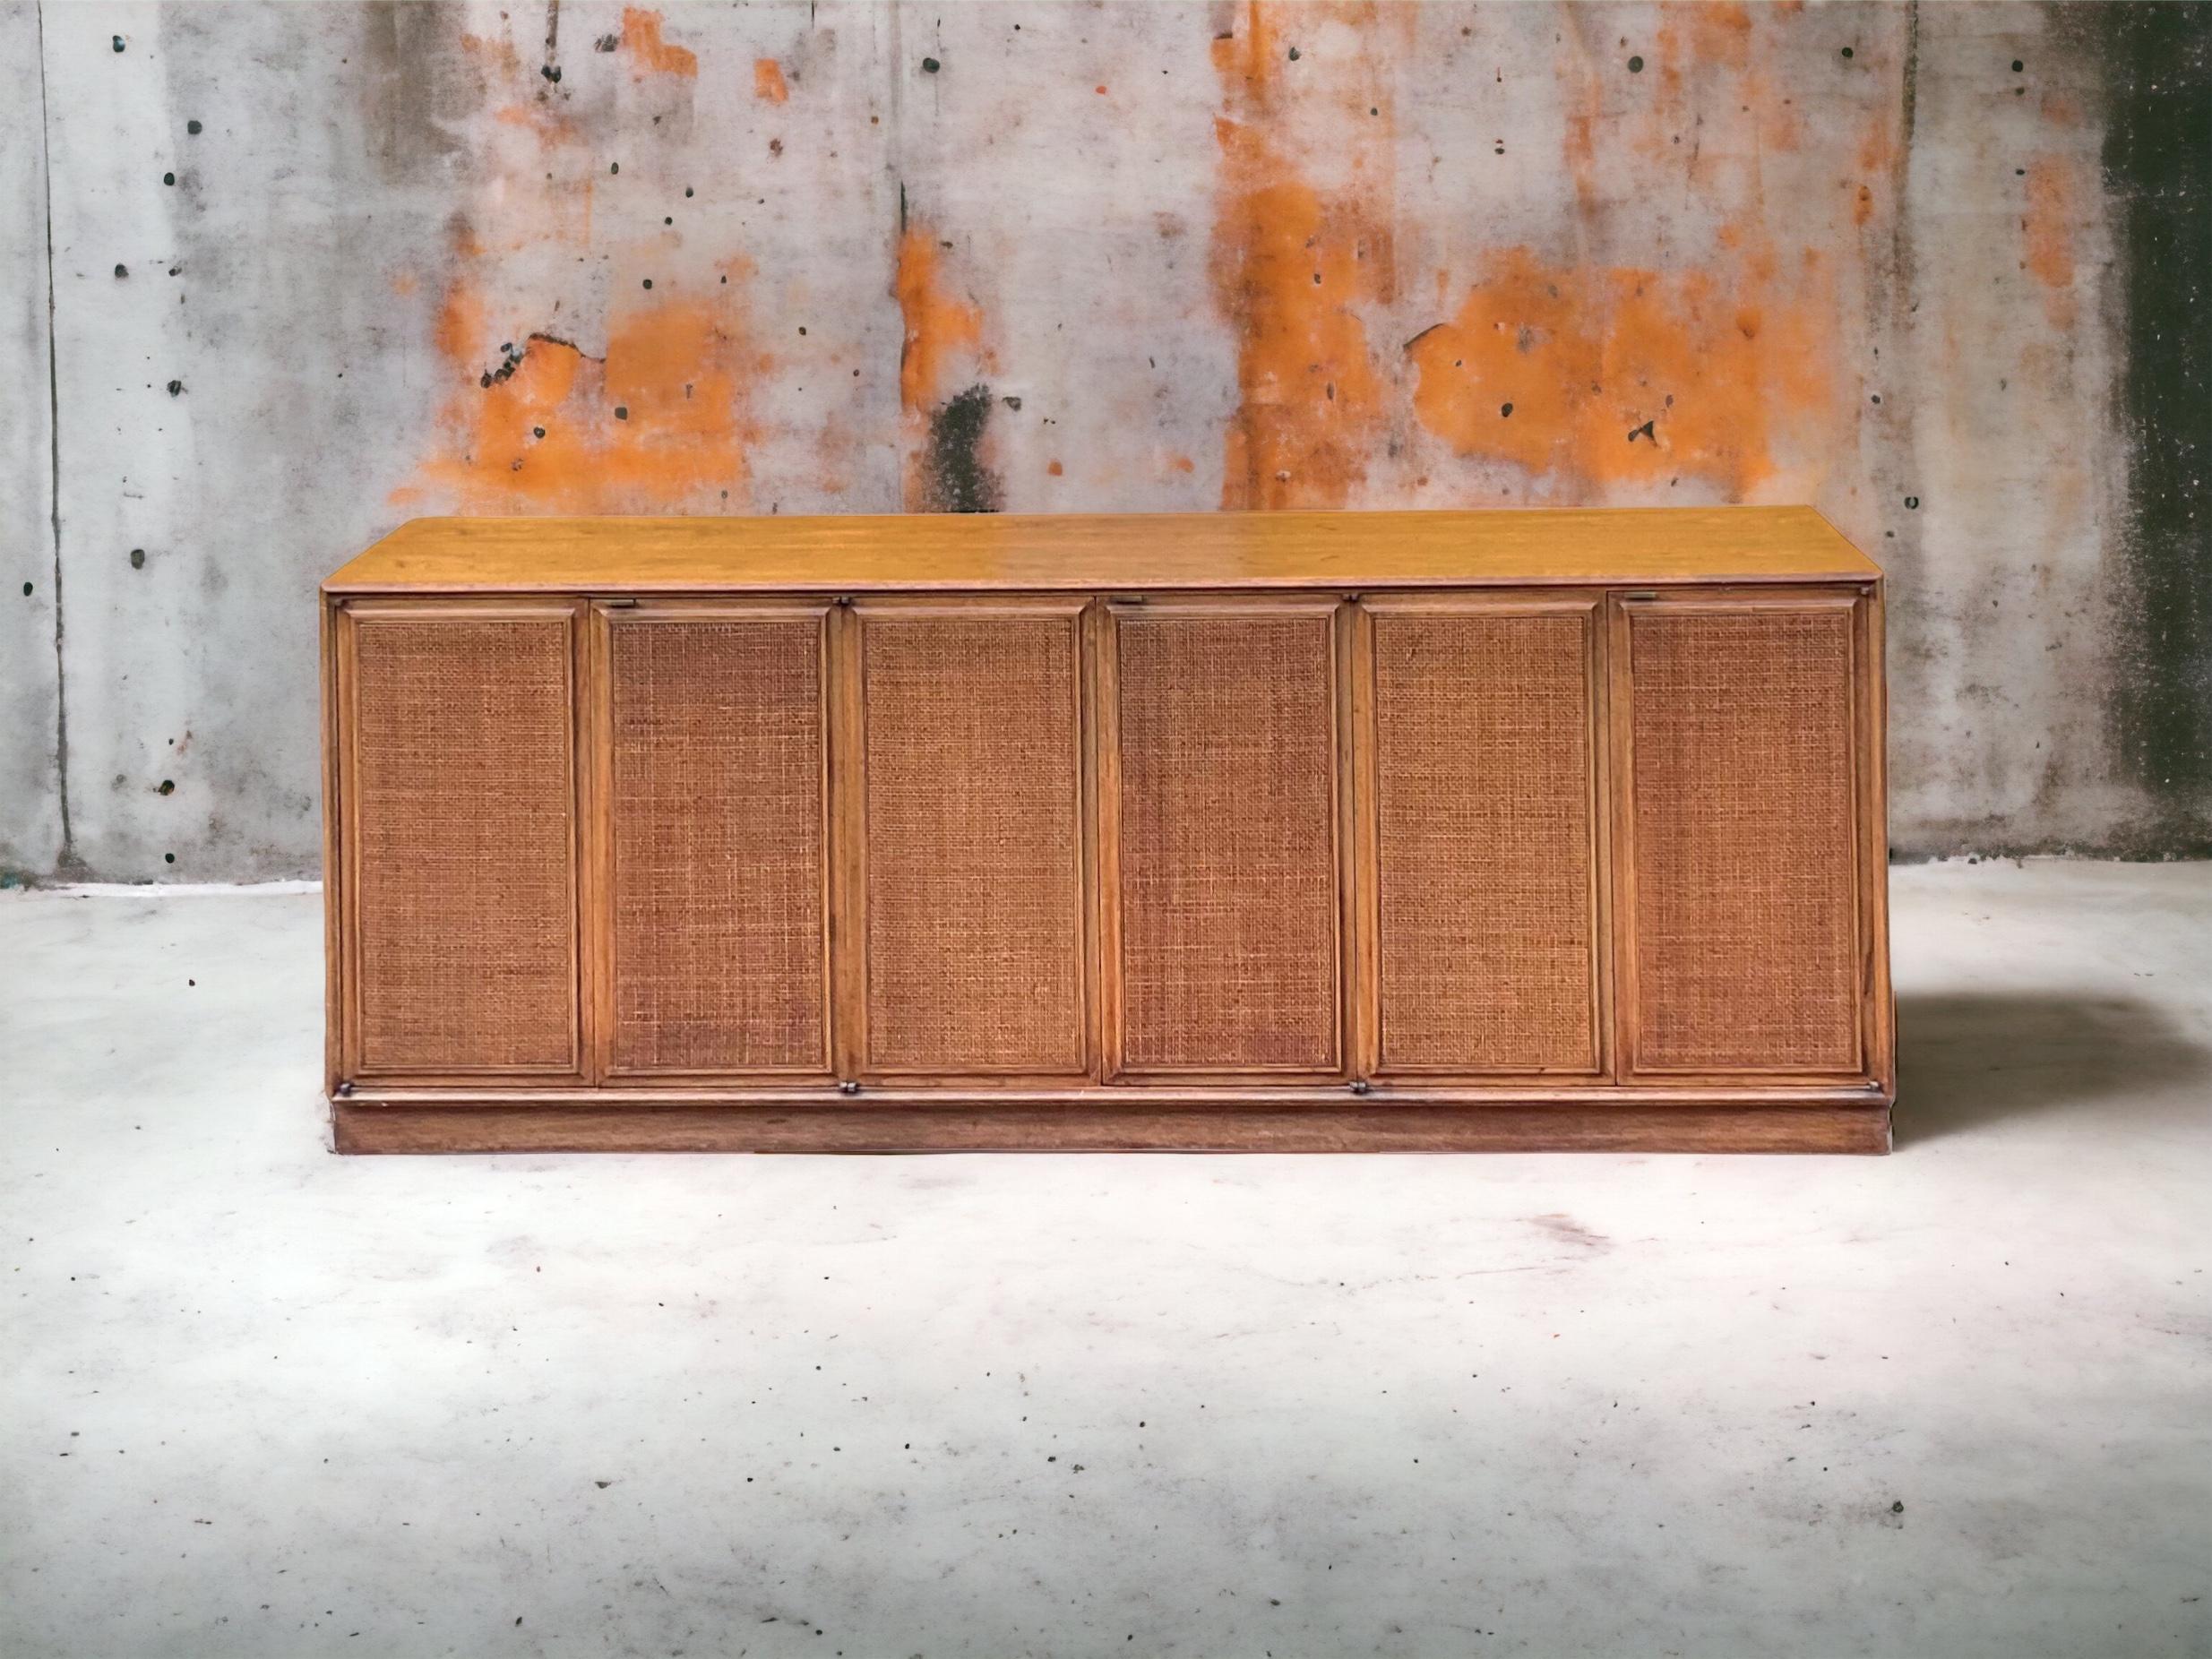 I love this hard-to-find cane front Paul McCobb credenza! The frame appears to be oak, and the six panels open to drawers over shelves. It dates approximately to the 1960s. It is unmarked.